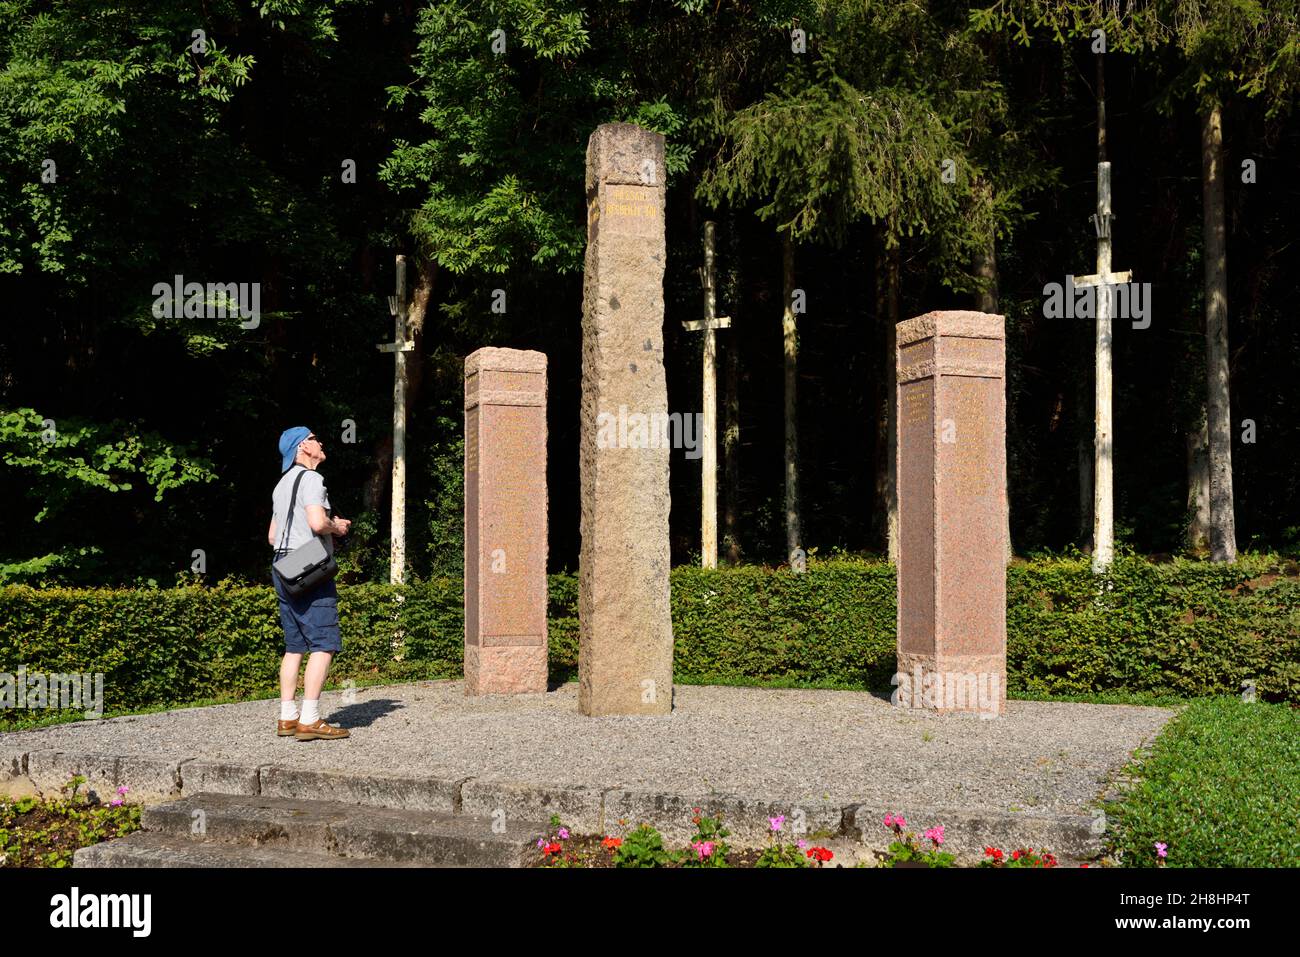 France, Meurthe-et-Moselle (54), Champigneulles, place called La Malpierre, monument in memory of the 63 Resistance fighters shot between 1941 and 1944 by the German occupiers in the clearing of La Malpierre Stock Photo